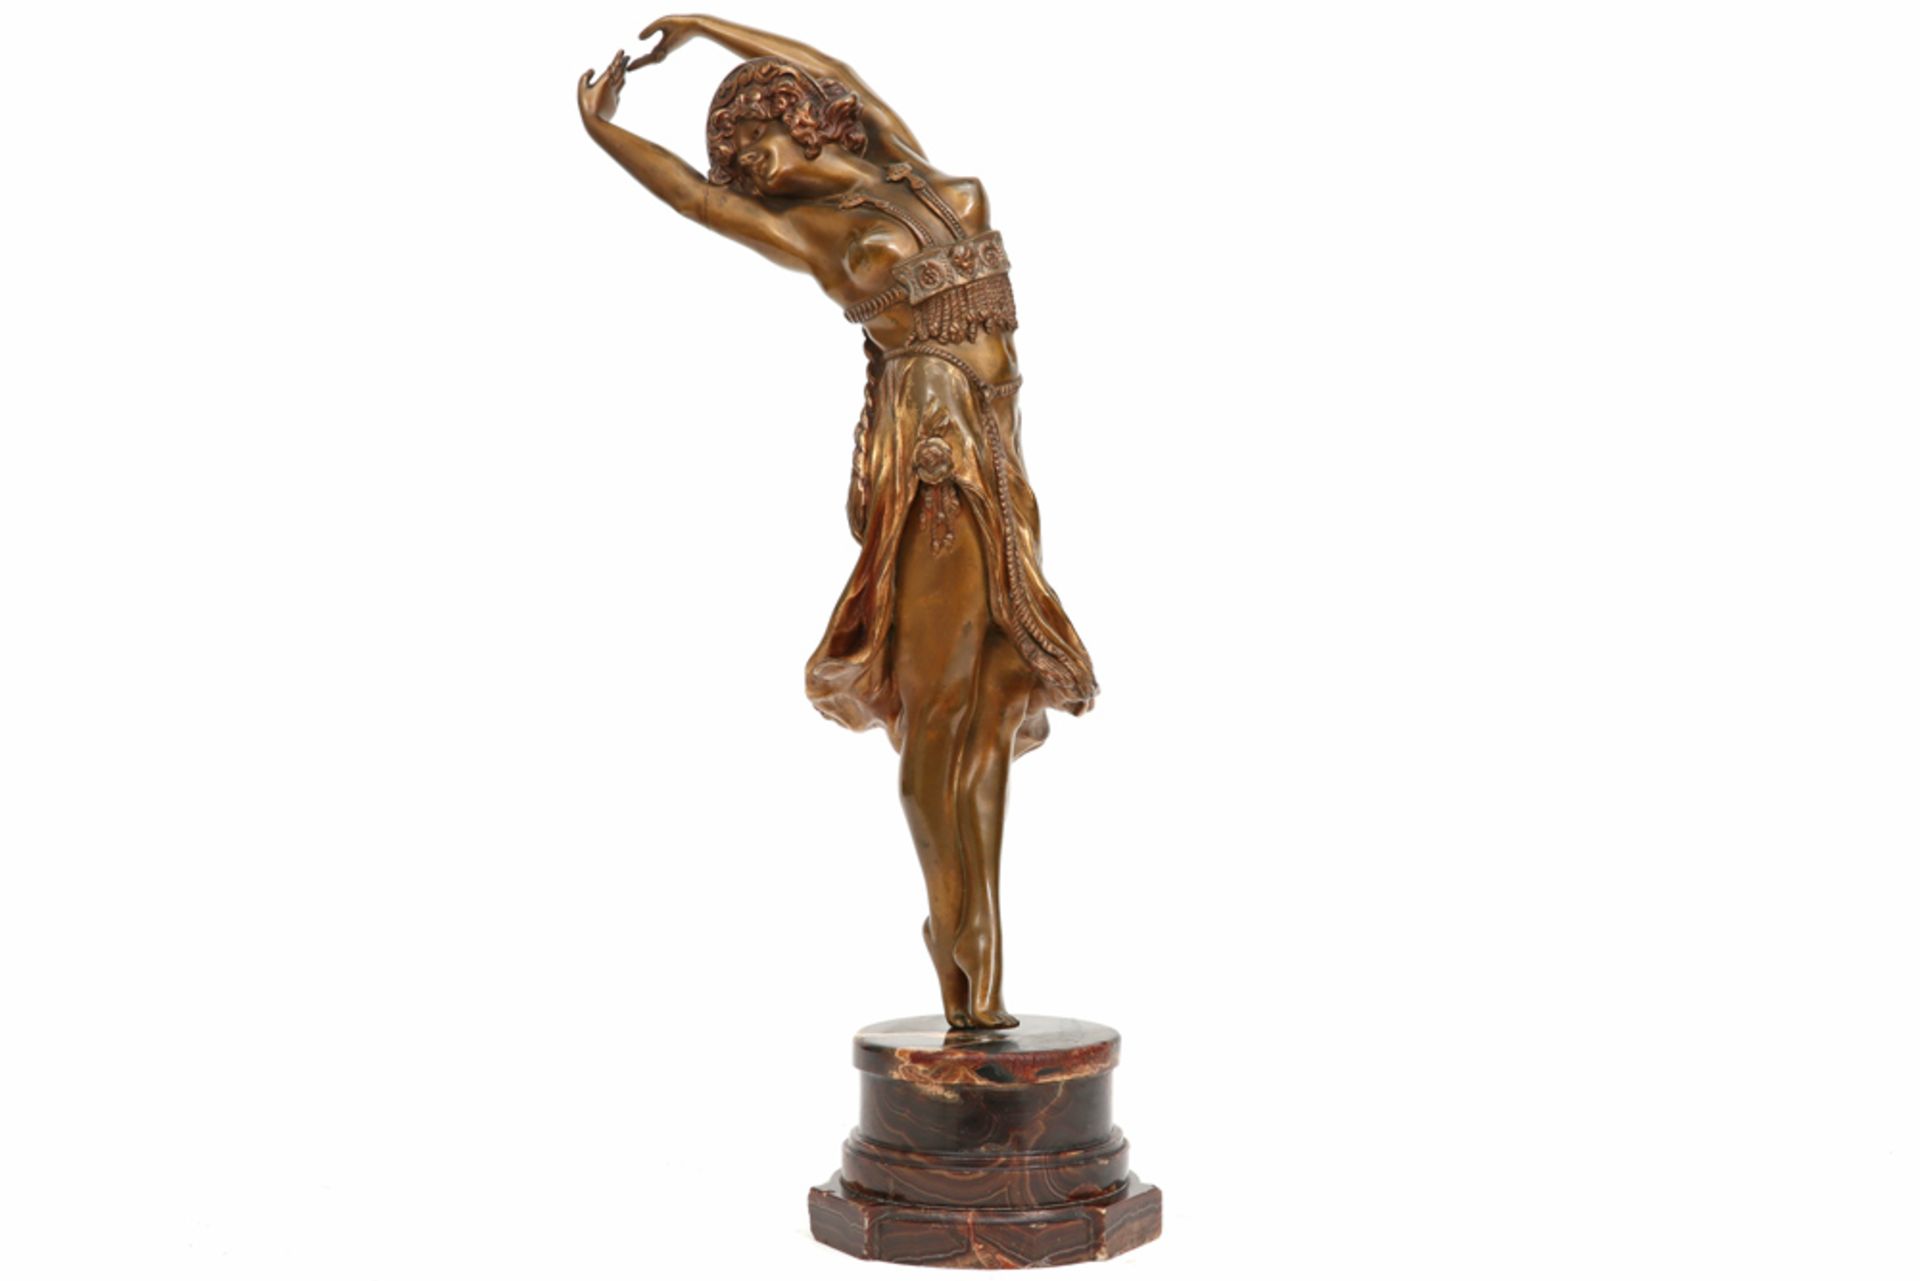 Jeanne Claire R. Colinet signed Art Deco sculpture in gilded bronze on its base in beautiful